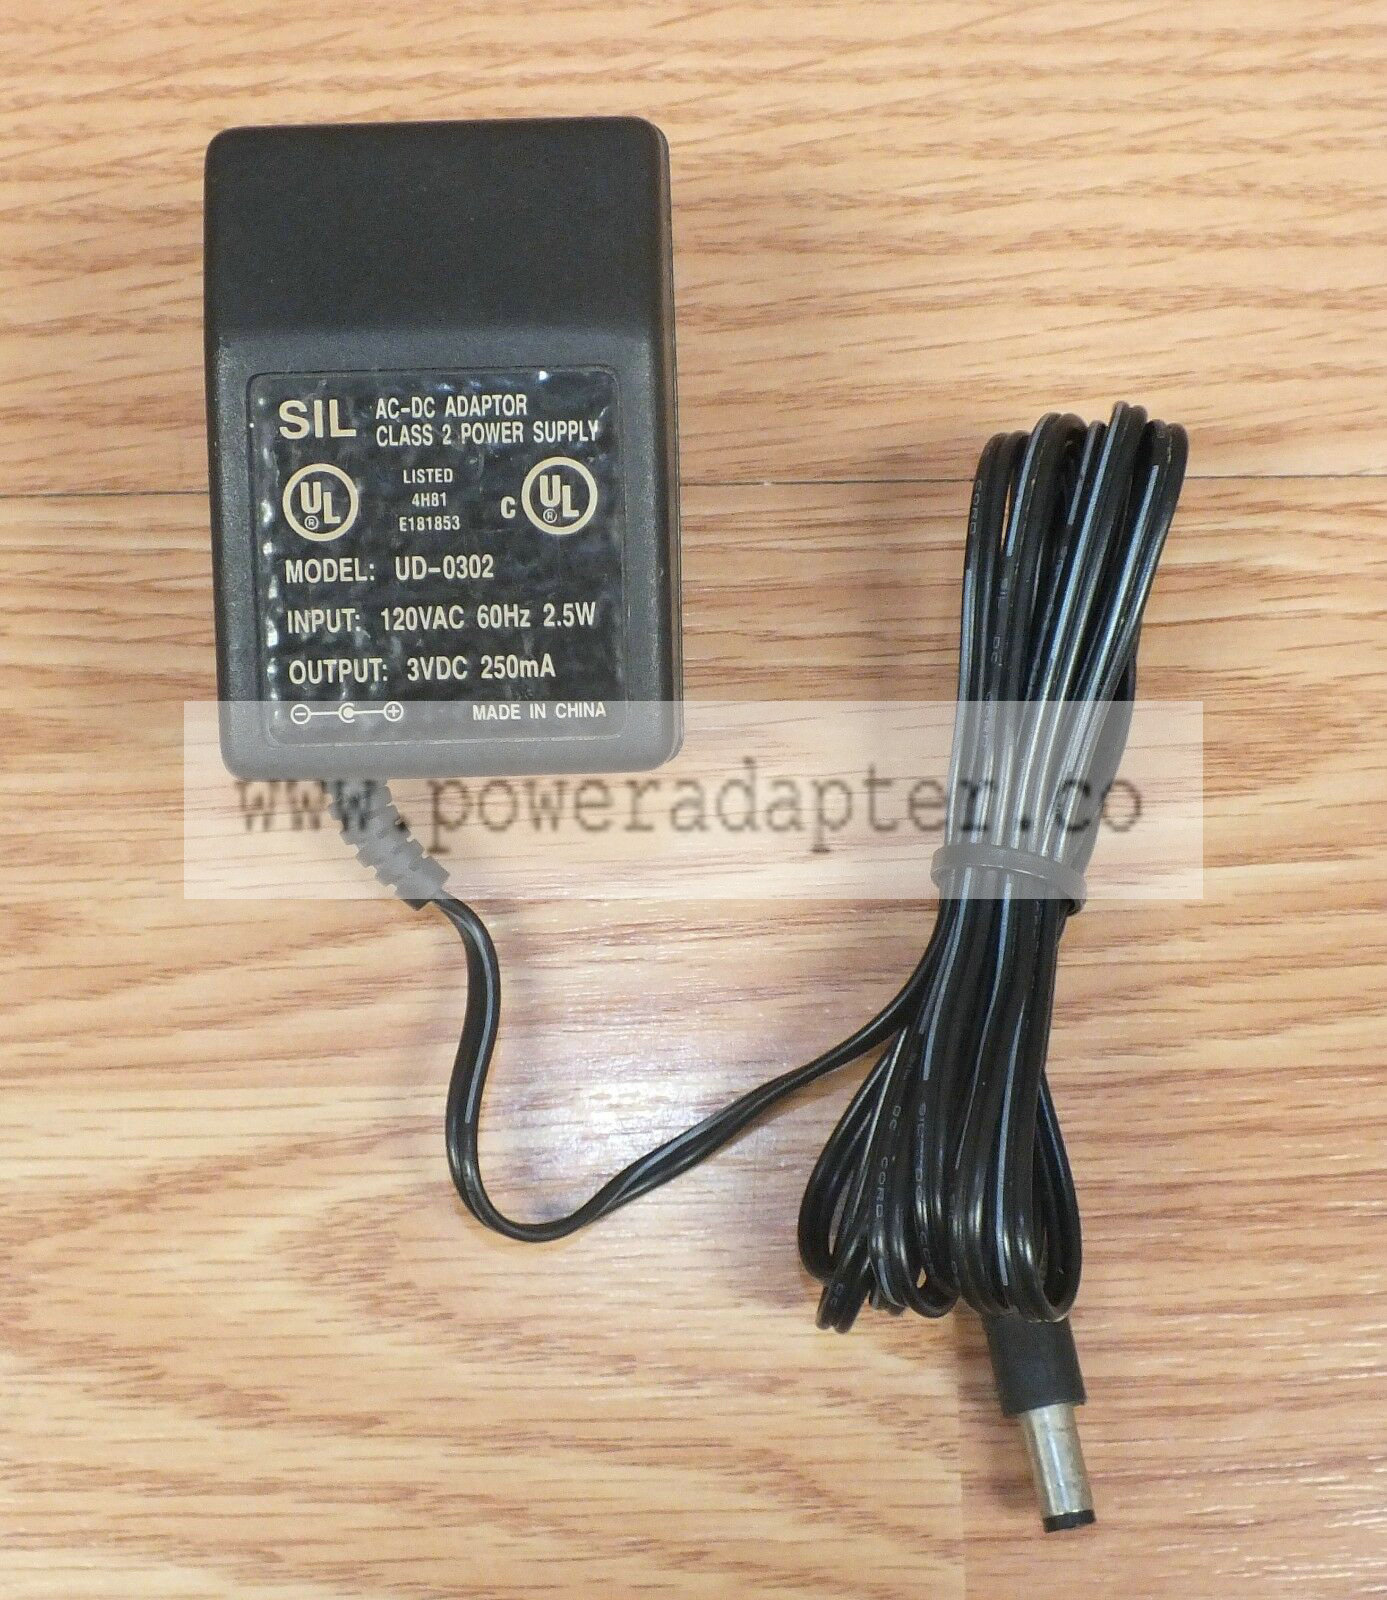 Genuine SIL (UD-0302) 3VDC 250mA Class 2 Power Supply / AC Adapter Only **READ** Country/Region of Manufacture: Chin - Click Image to Close